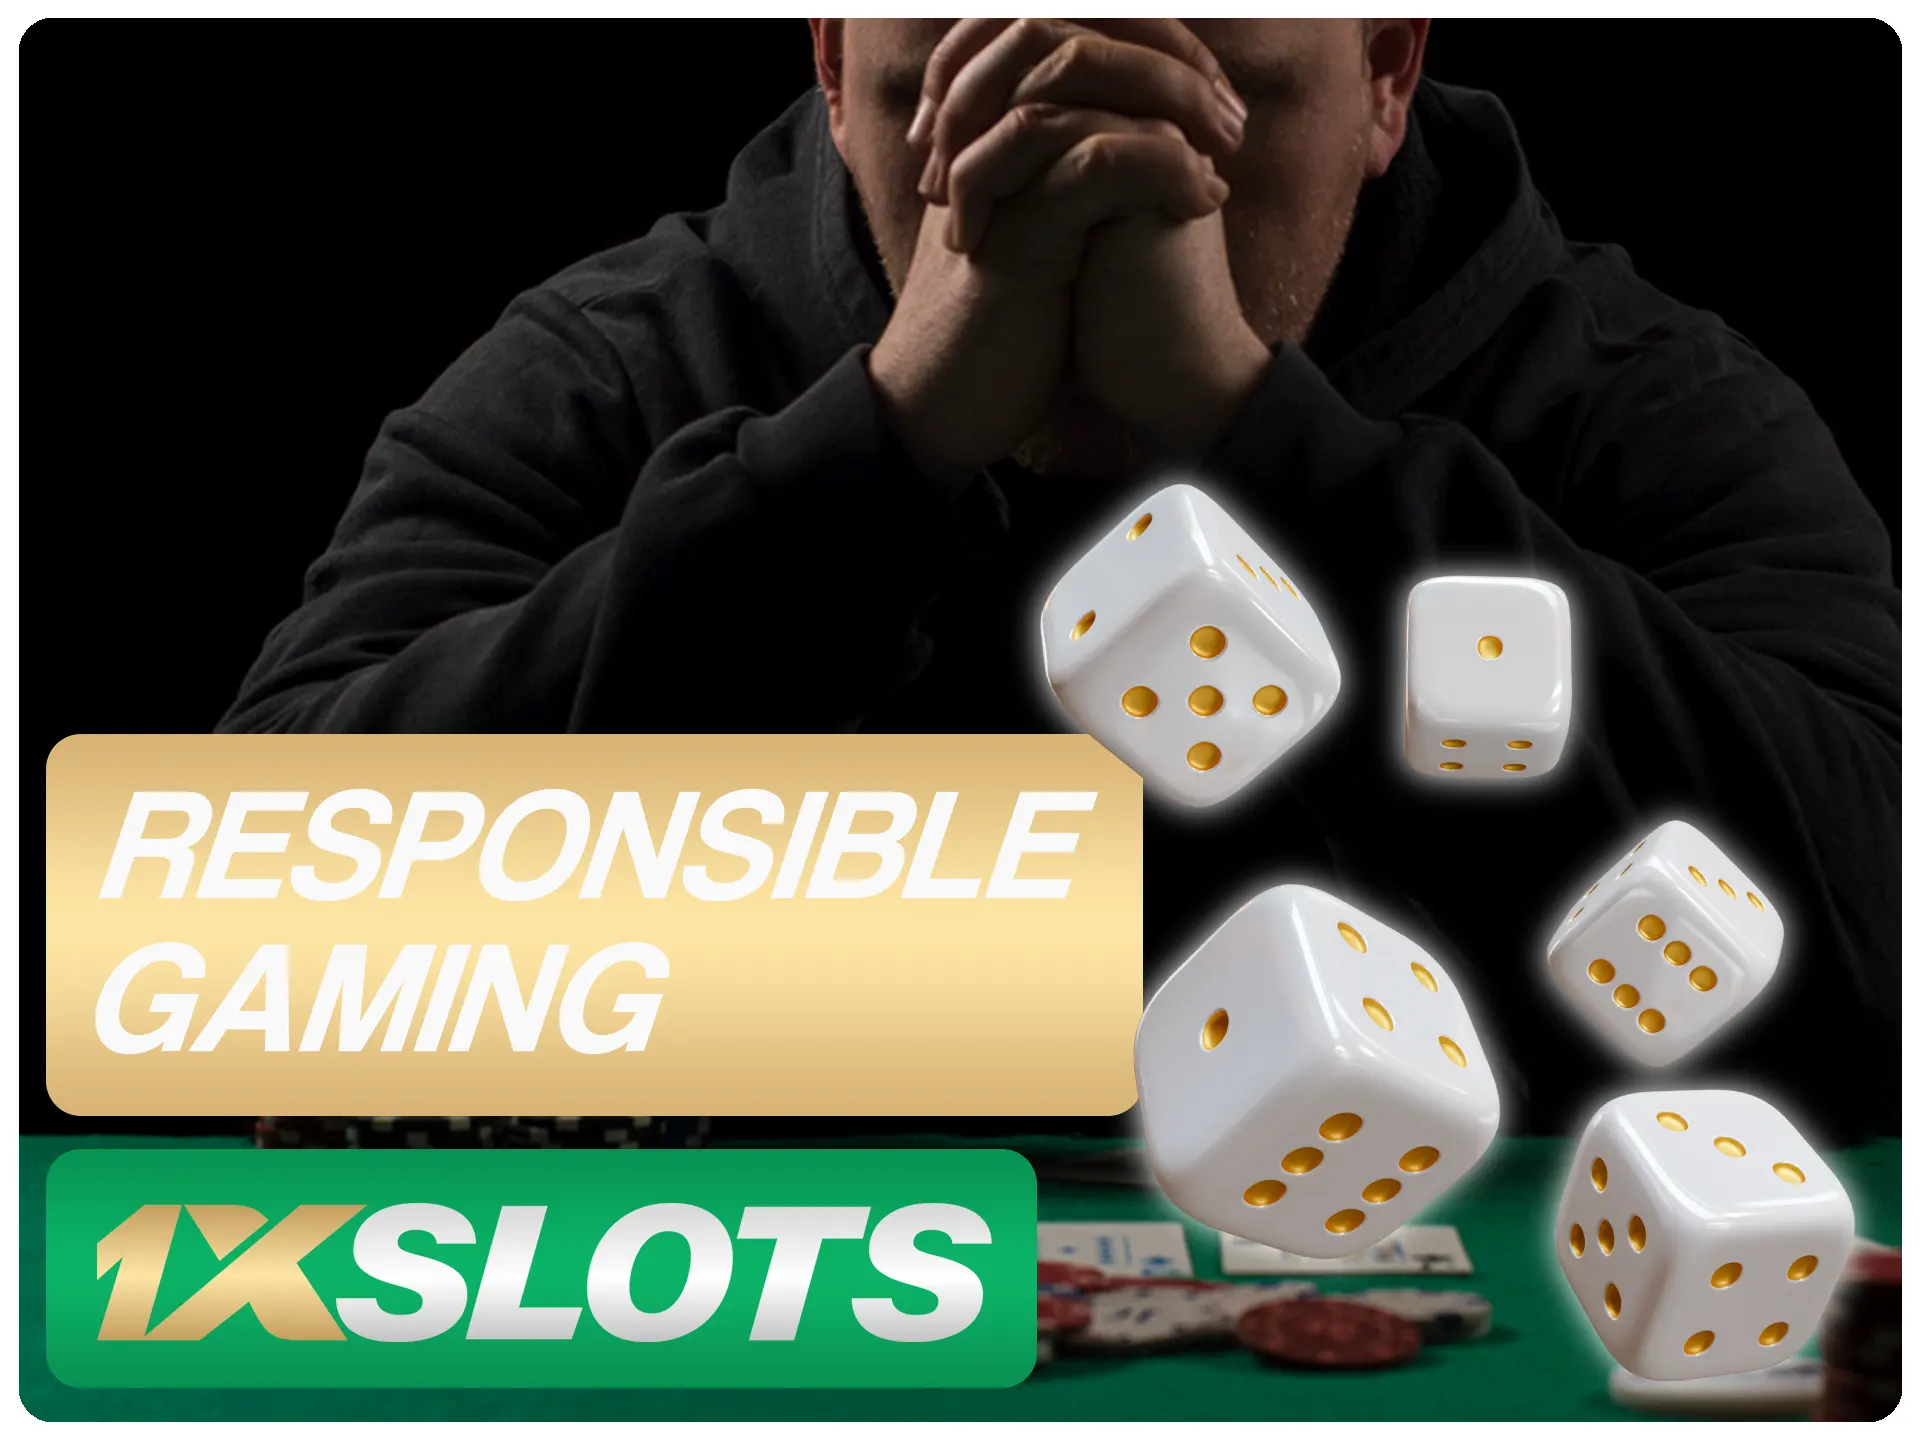 Be patient when gaming at 1xSlots.